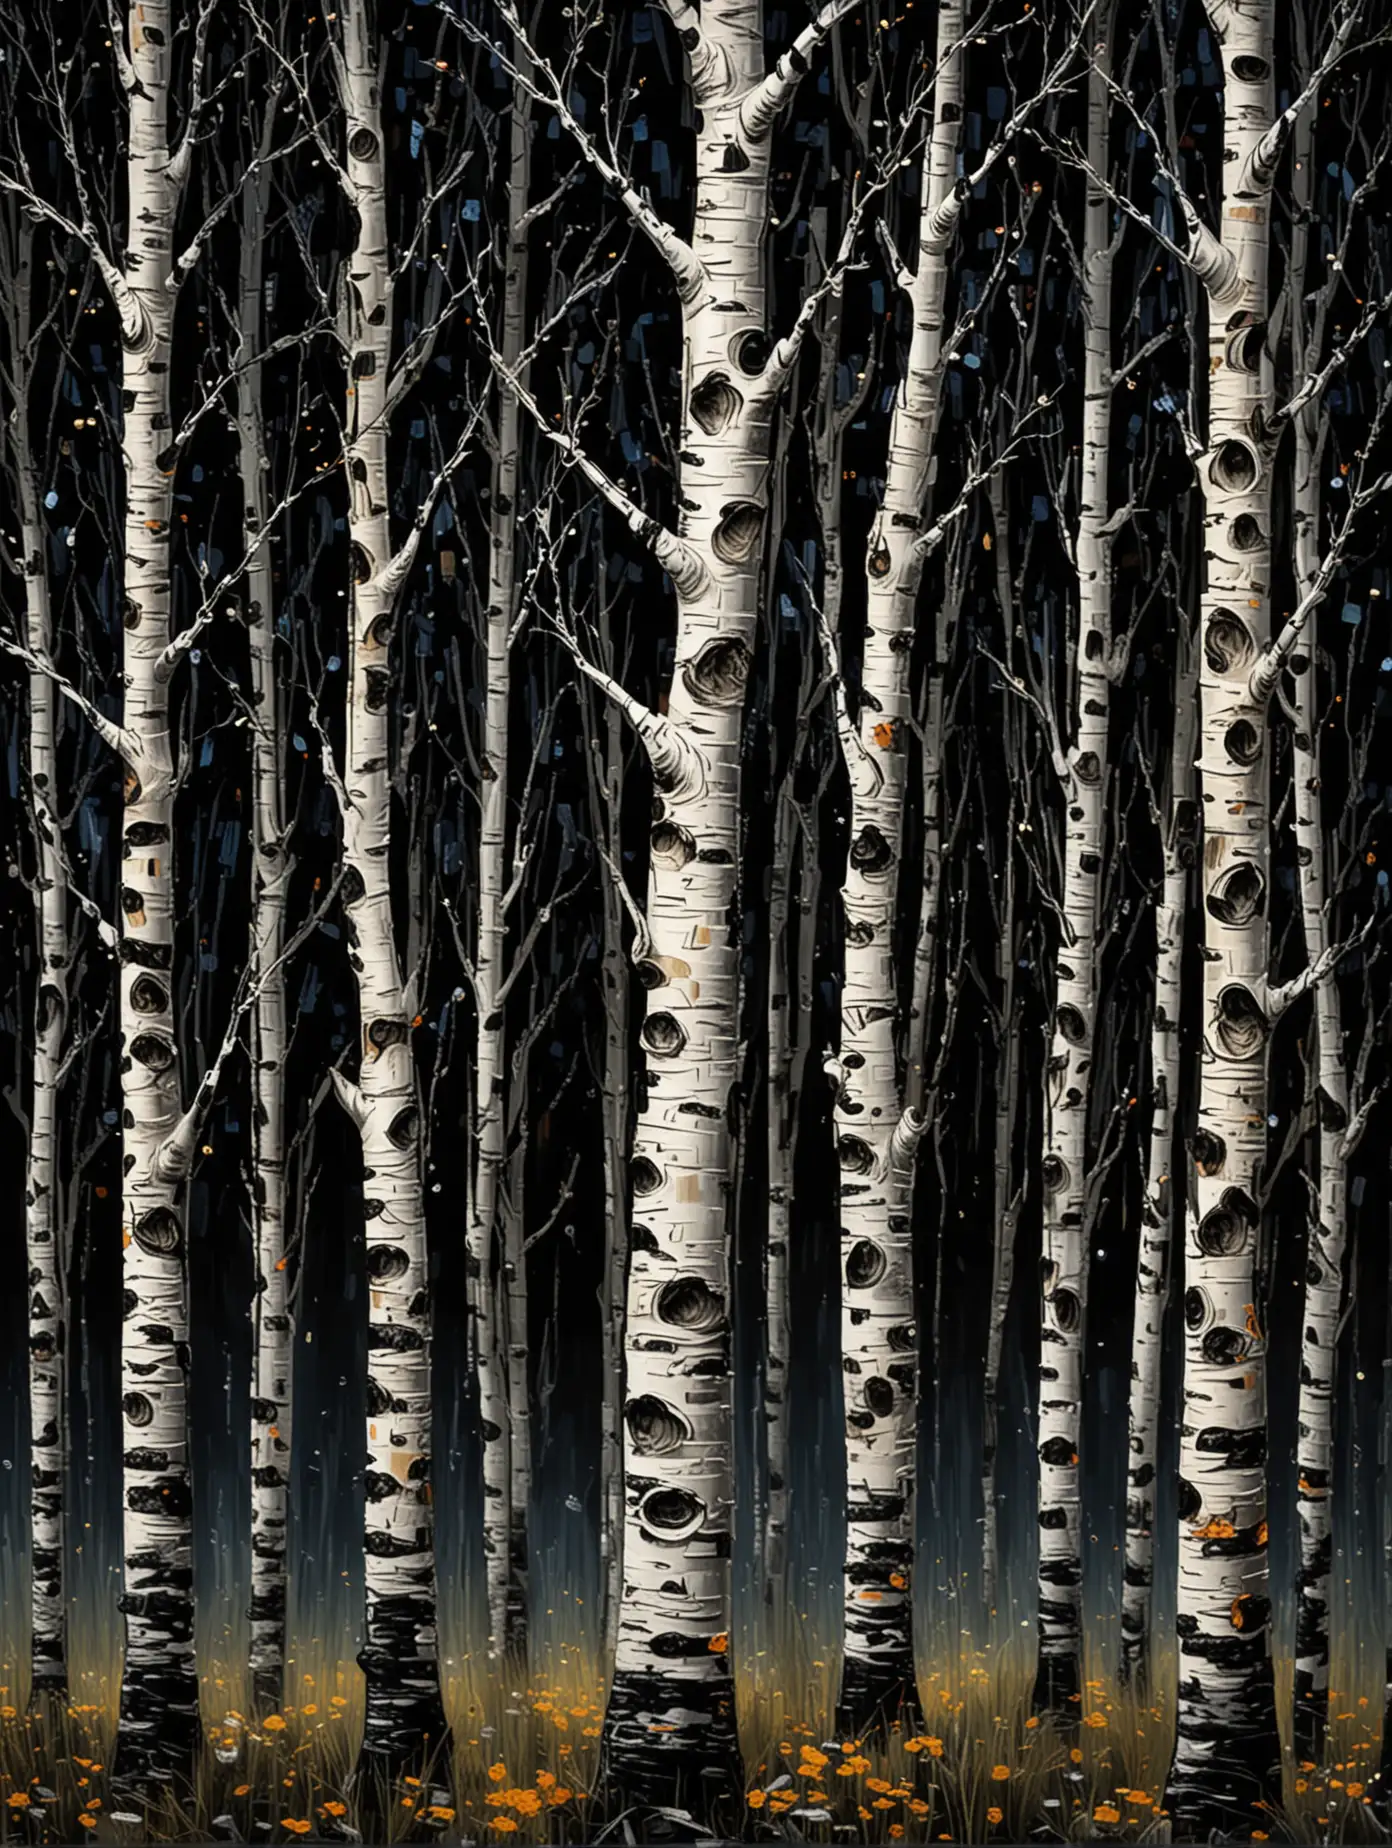 Mysterious Night Birch Trees with Glowing Moonlight